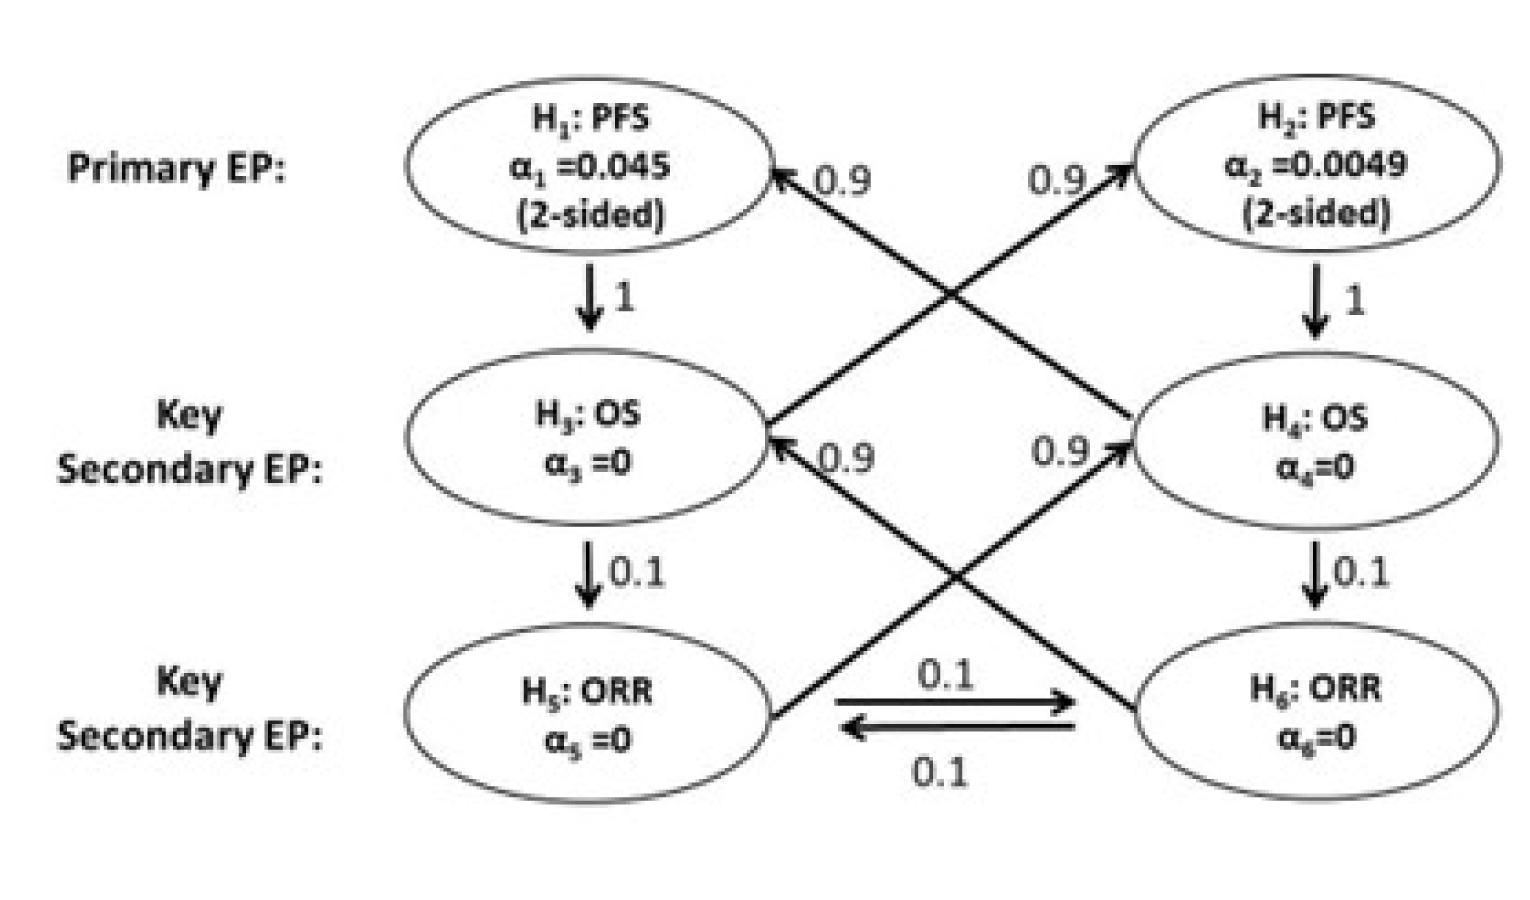 Graphic representing the initial alpha allocation (the remaining alpha was 0.0499) for each hypothesis test stated in the CLEAR trial and the graphical approach for multiple analyses of PFS, OS, and ORR. The initial 2-sided test for each hypothesis is presented in each ellipse. The weights for reallocation from each hypothesis to the others are shown in the boxes on the lines connecting hypotheses.